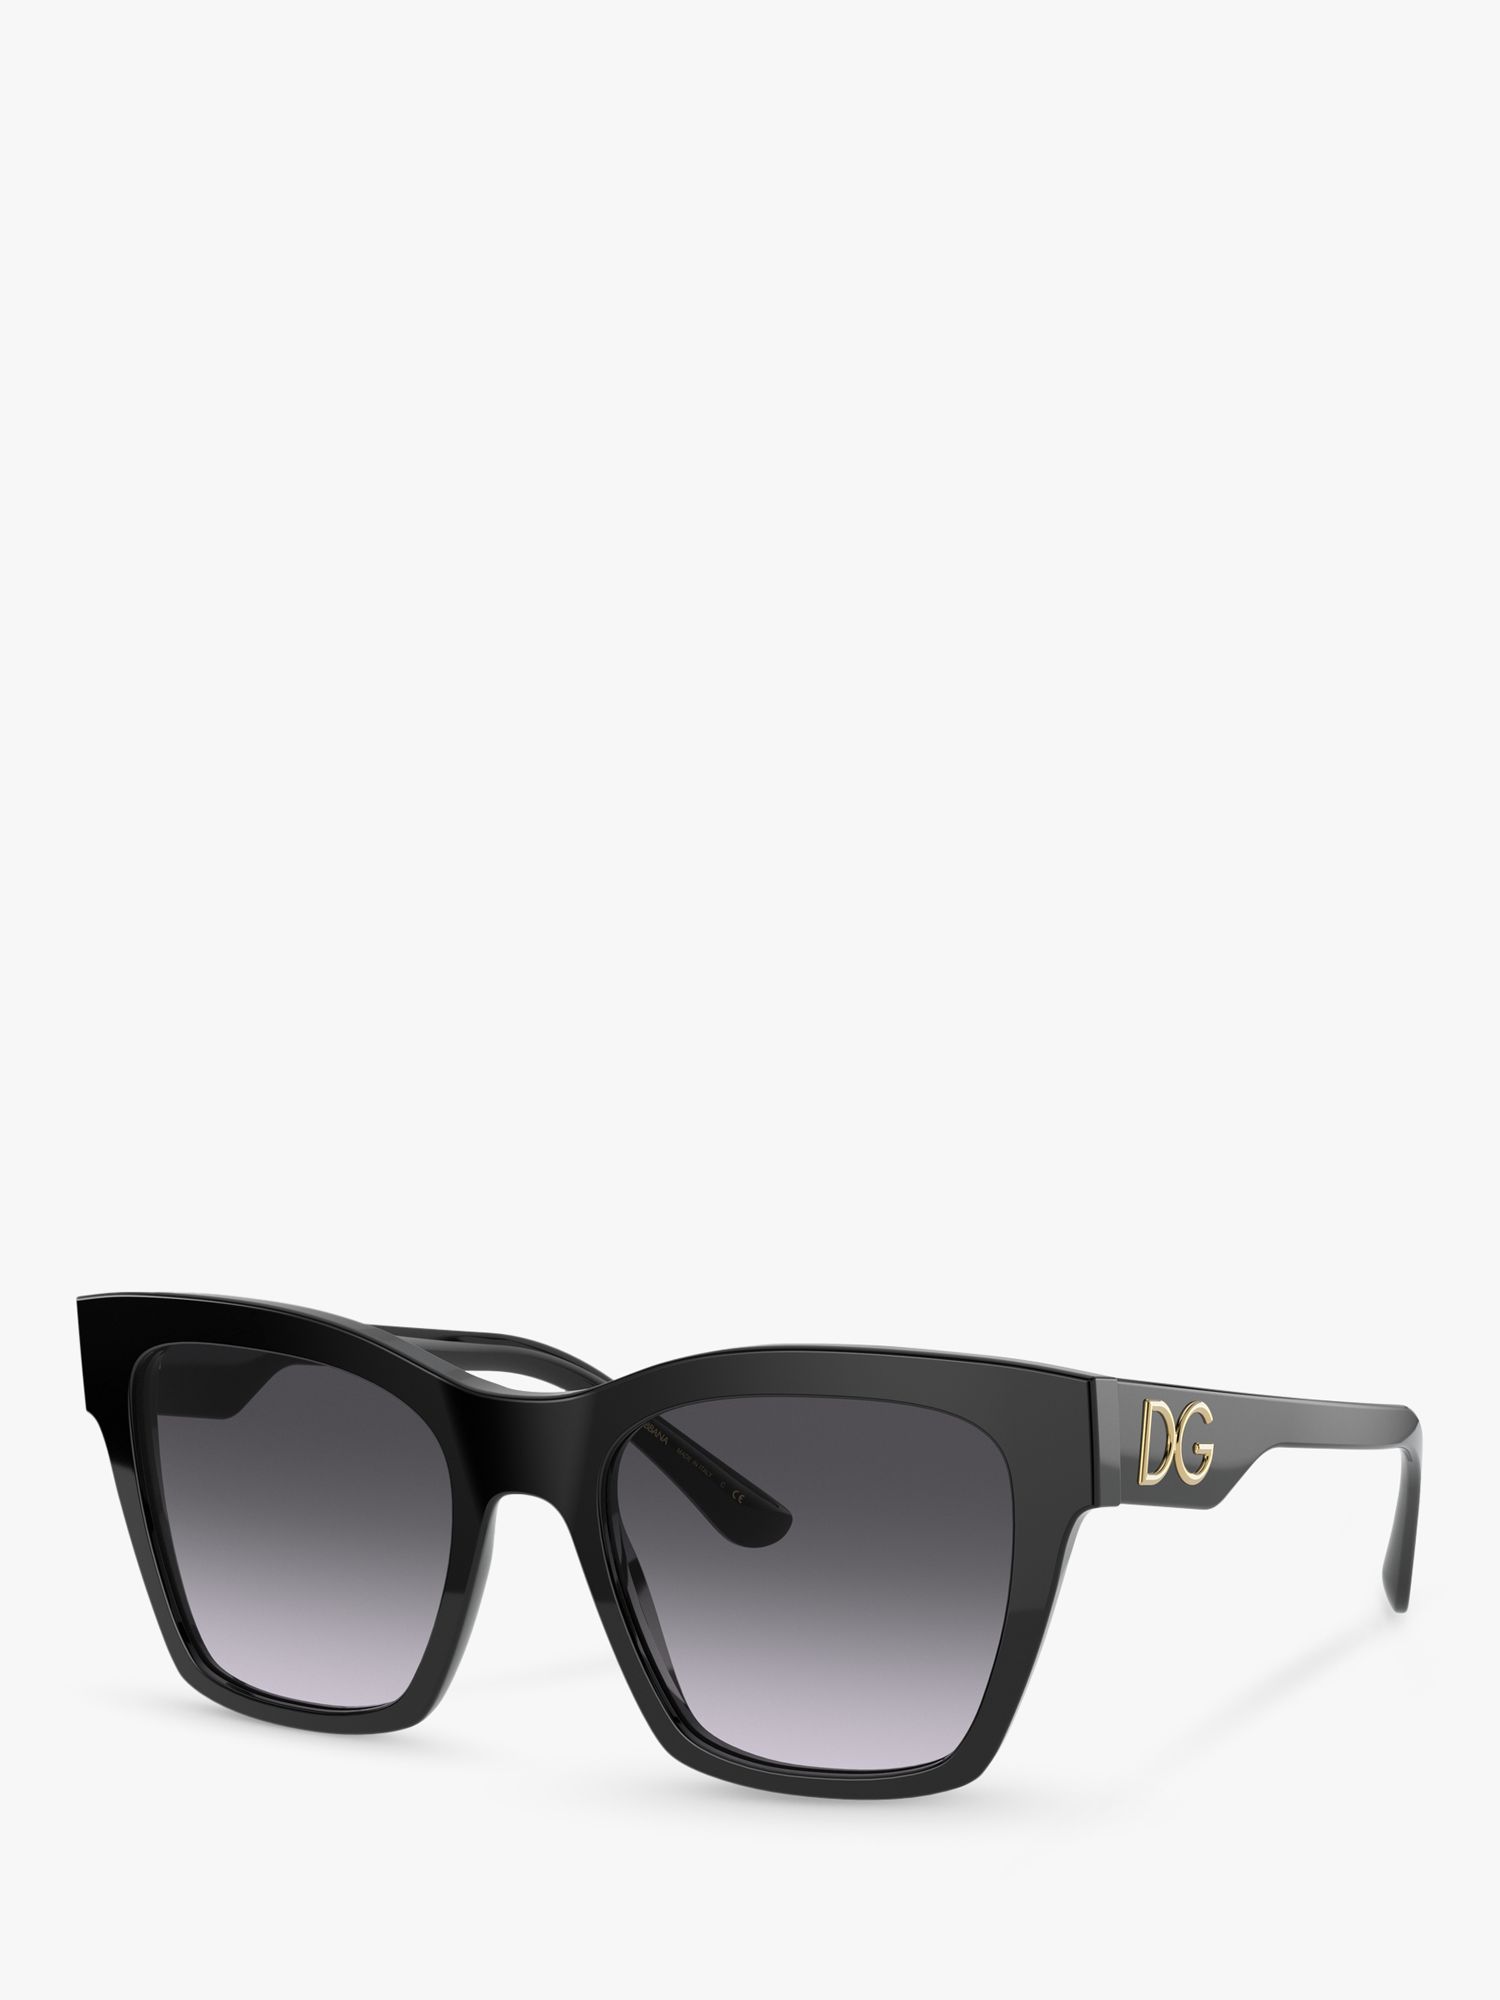 Top 38+ imagen dolce and gabbana sunglasses review